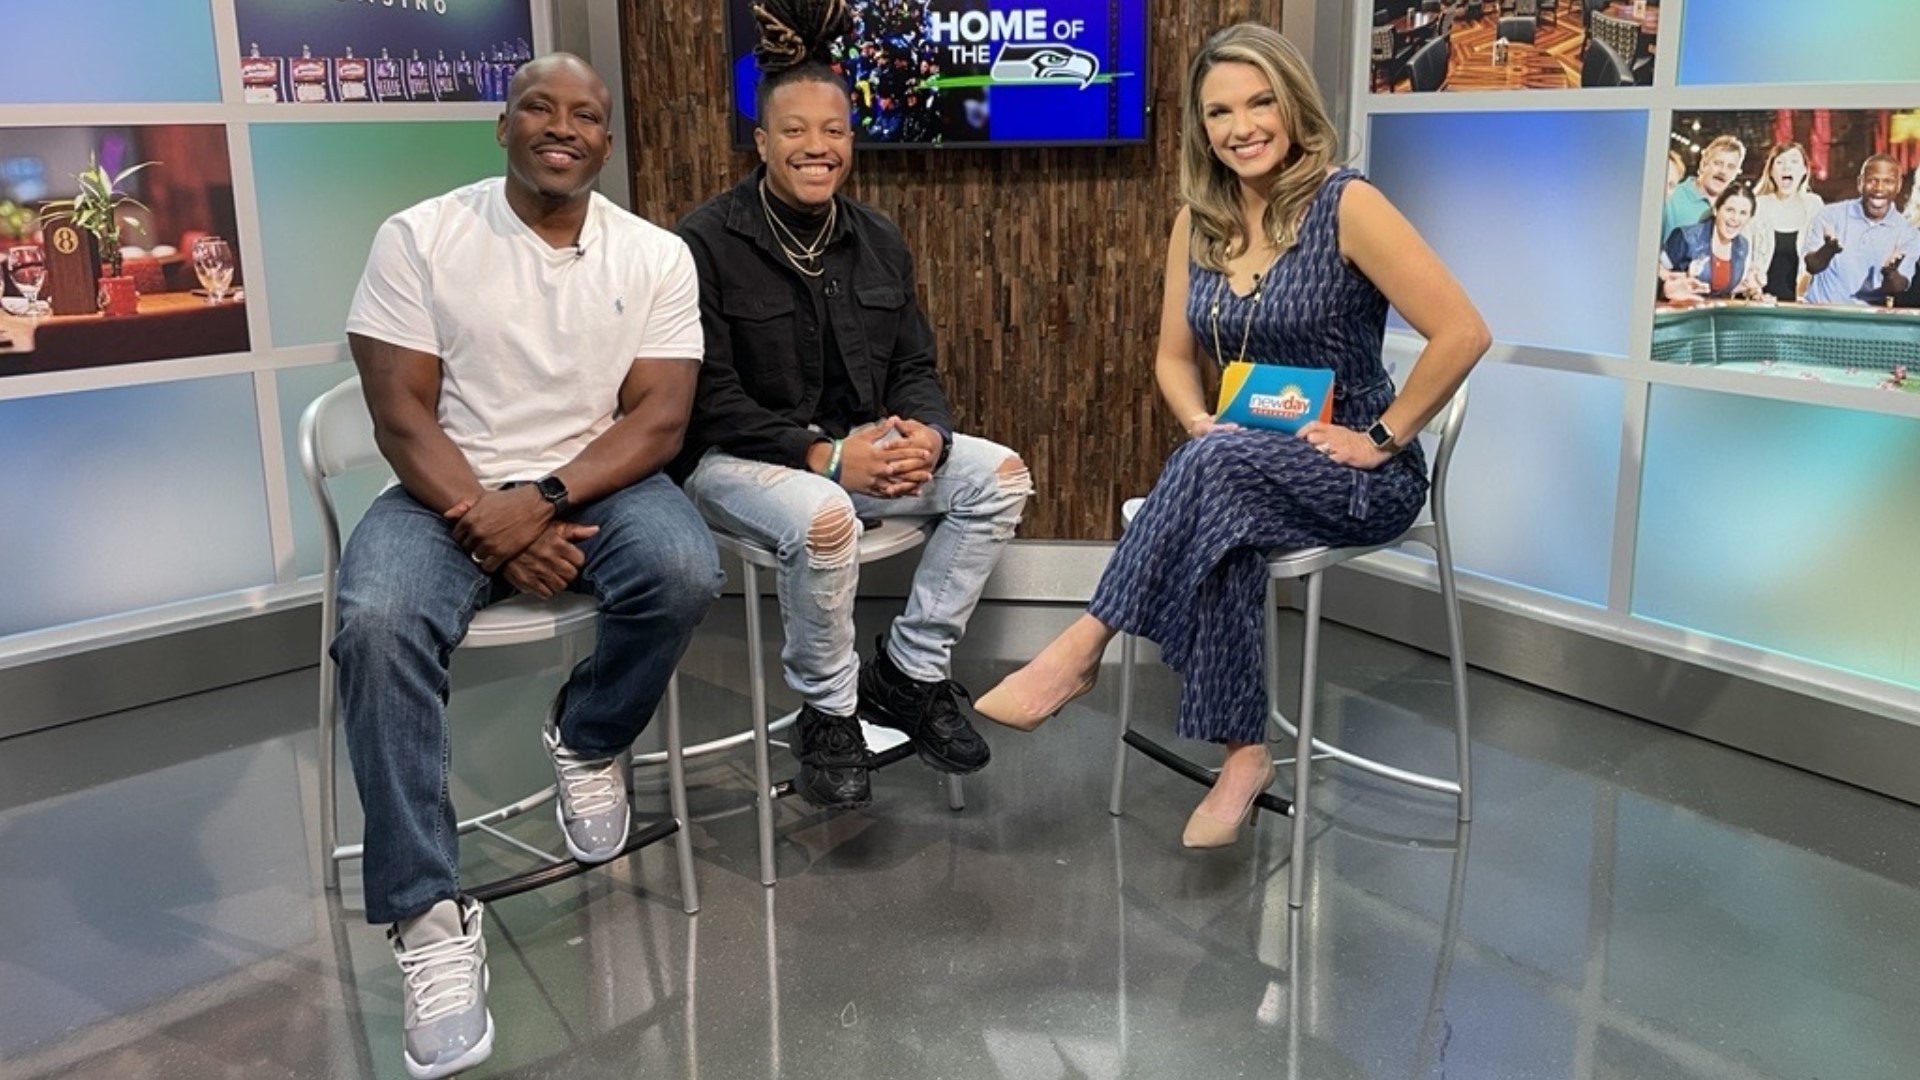 New Day contributor Terry Hollimon and staff writer at The Athletic Michael-Shawn Dugar joined Amity for another round of Hawk Zone. Sponsored by Muckleshoot Casino.